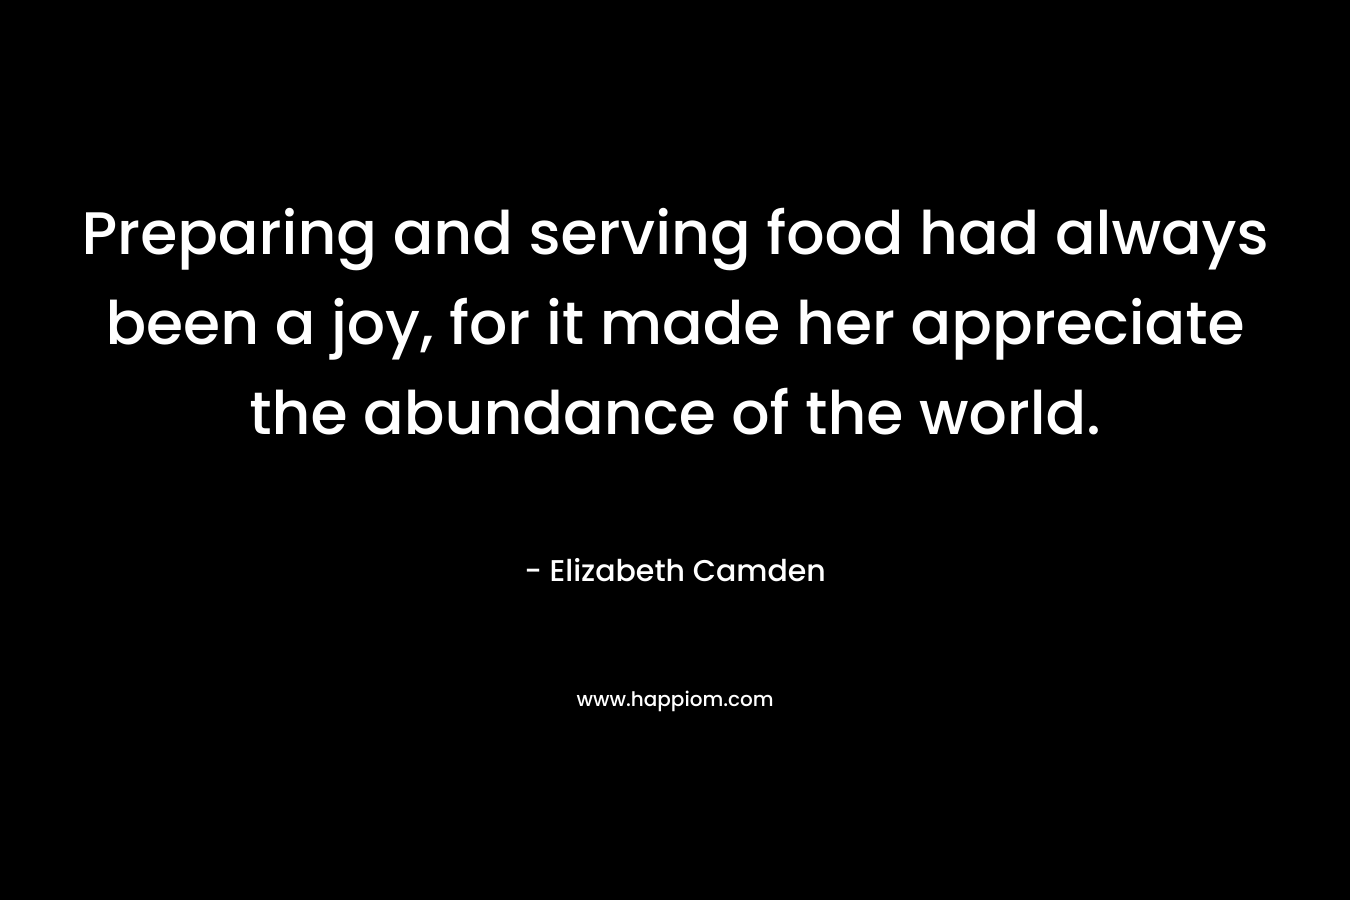 Preparing and serving food had always been a joy, for it made her appreciate the abundance of the world.